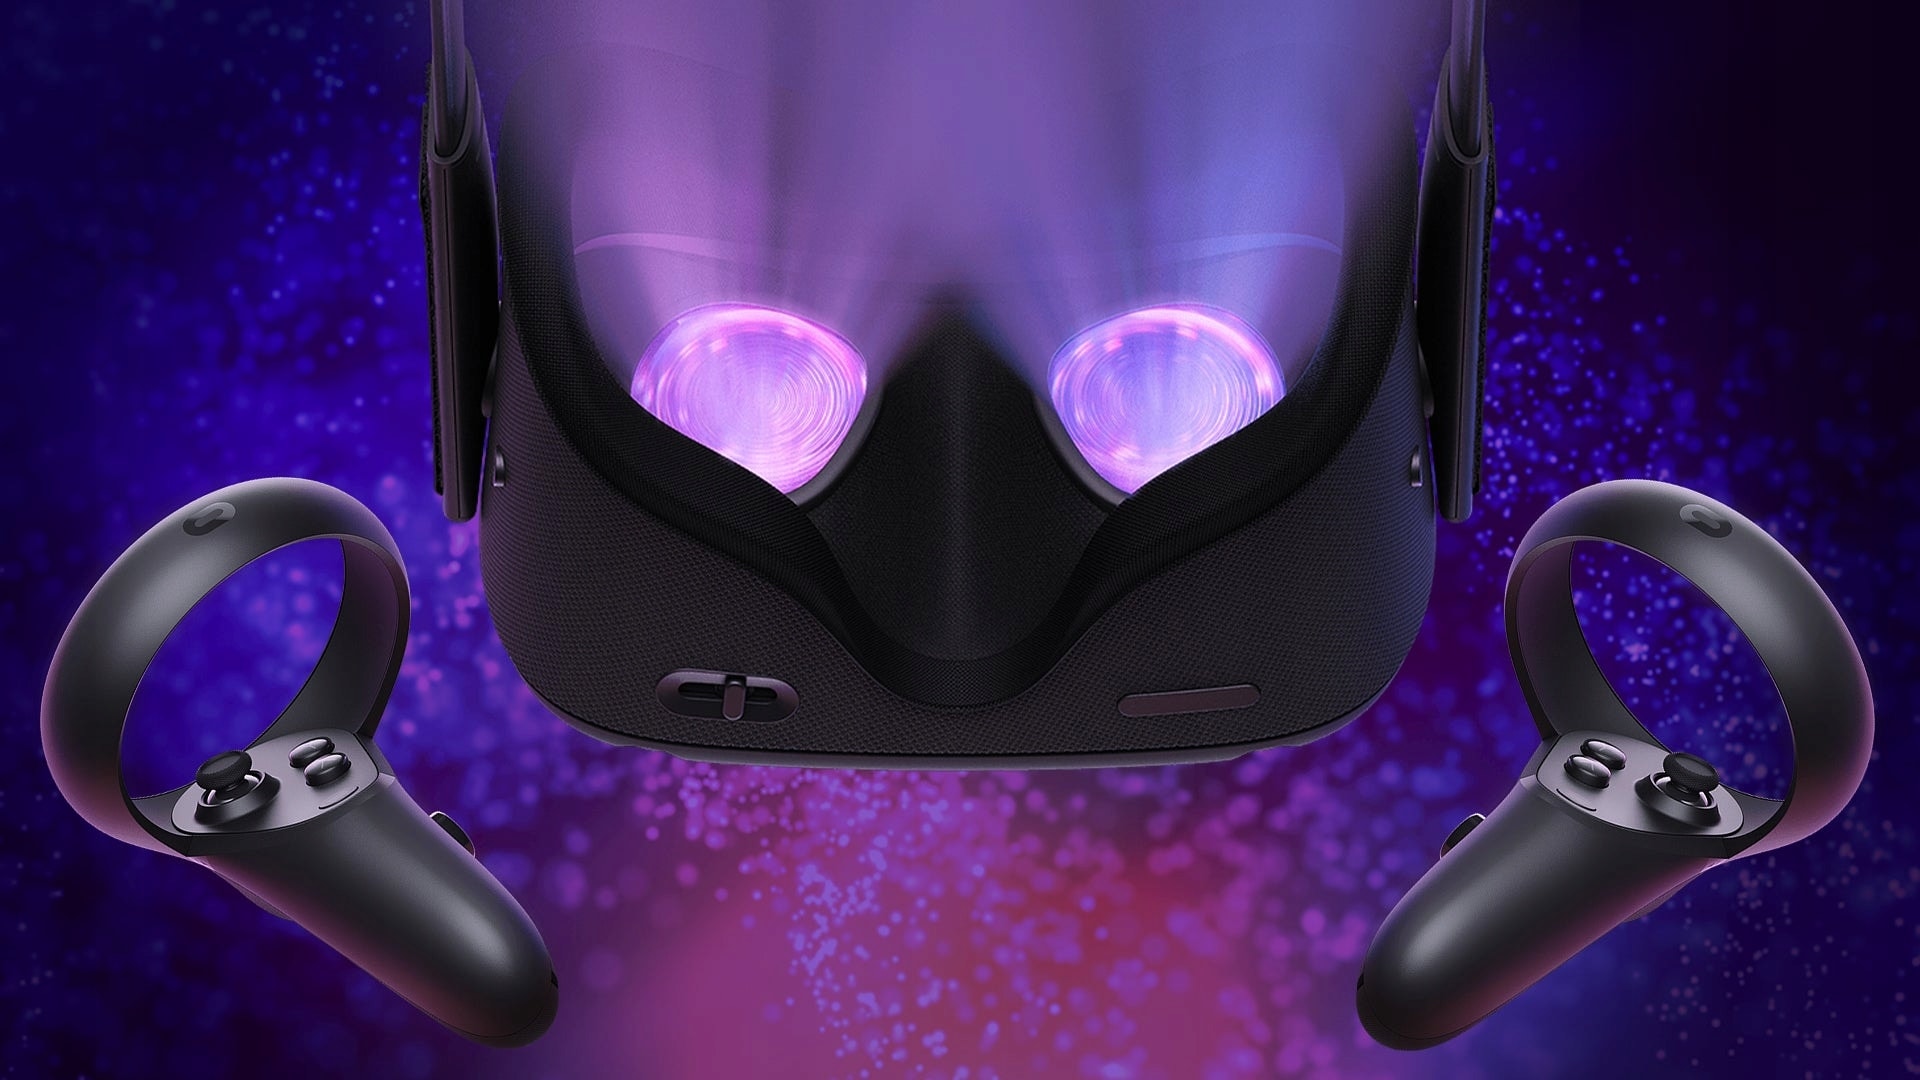 The most anticipated games on the Oculus Quest in 2020